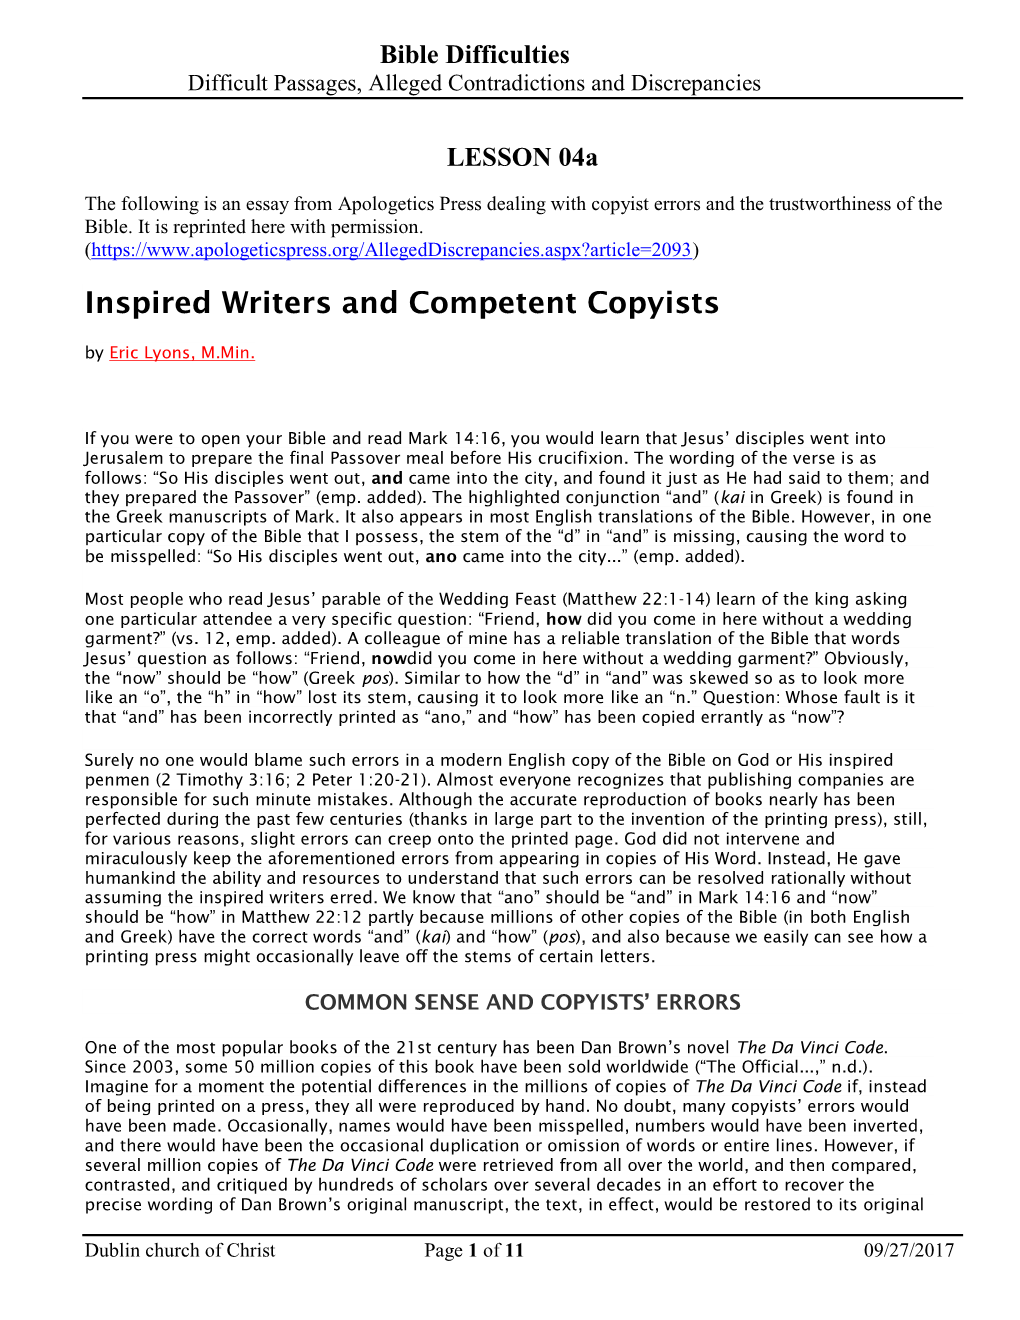 Inspired Writers and Competent Copyists by Eric Lyons, M.Min